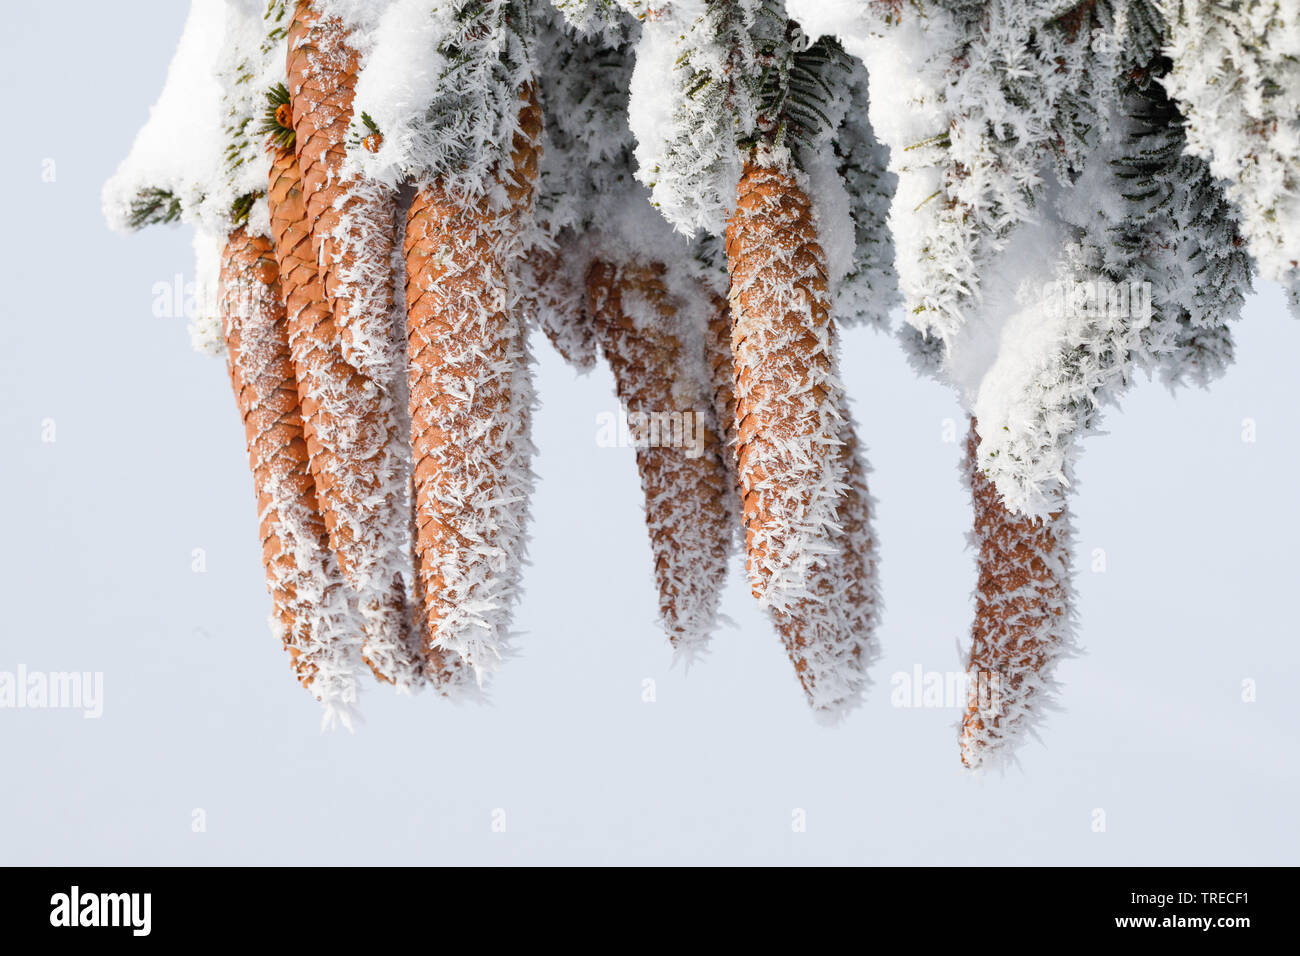 Norway spruce (Picea abies), spruce cones with hoarfrost, Switzerland Stock Photo